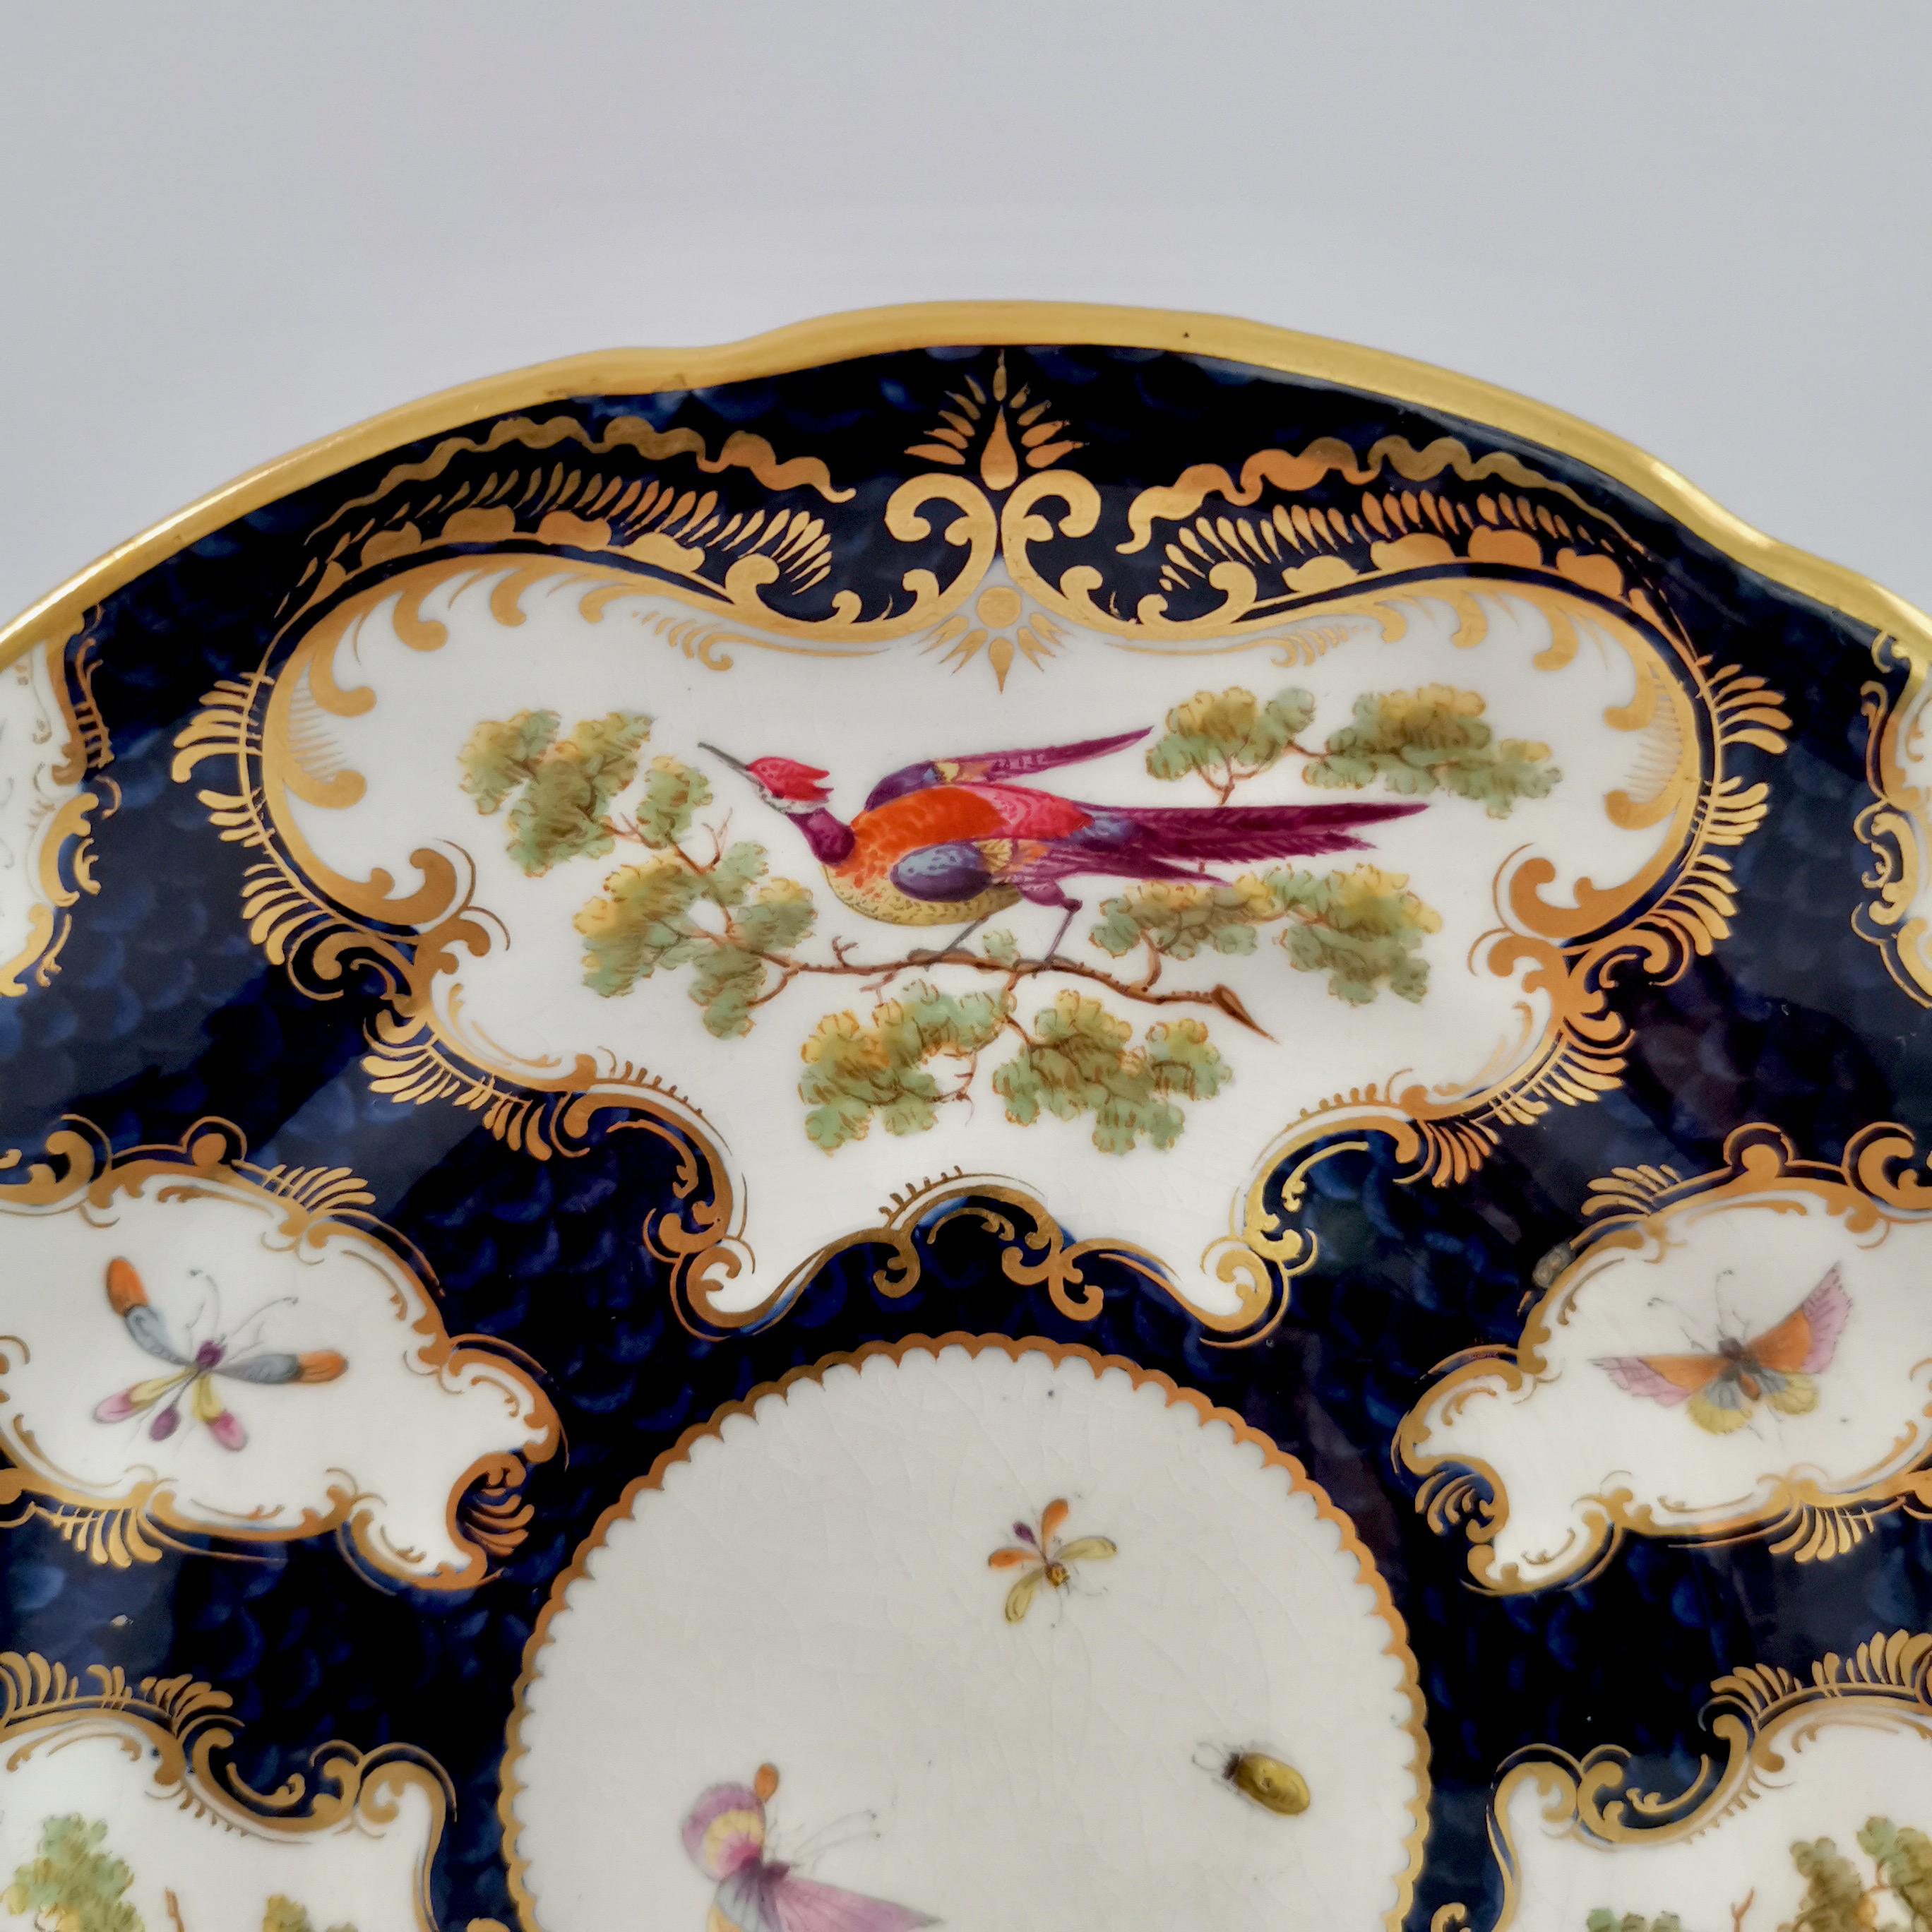 Late 19th Century Grainger Worcester Porcelain Plate, Blue Sèvres Birds and Insects circa 1880 '2'